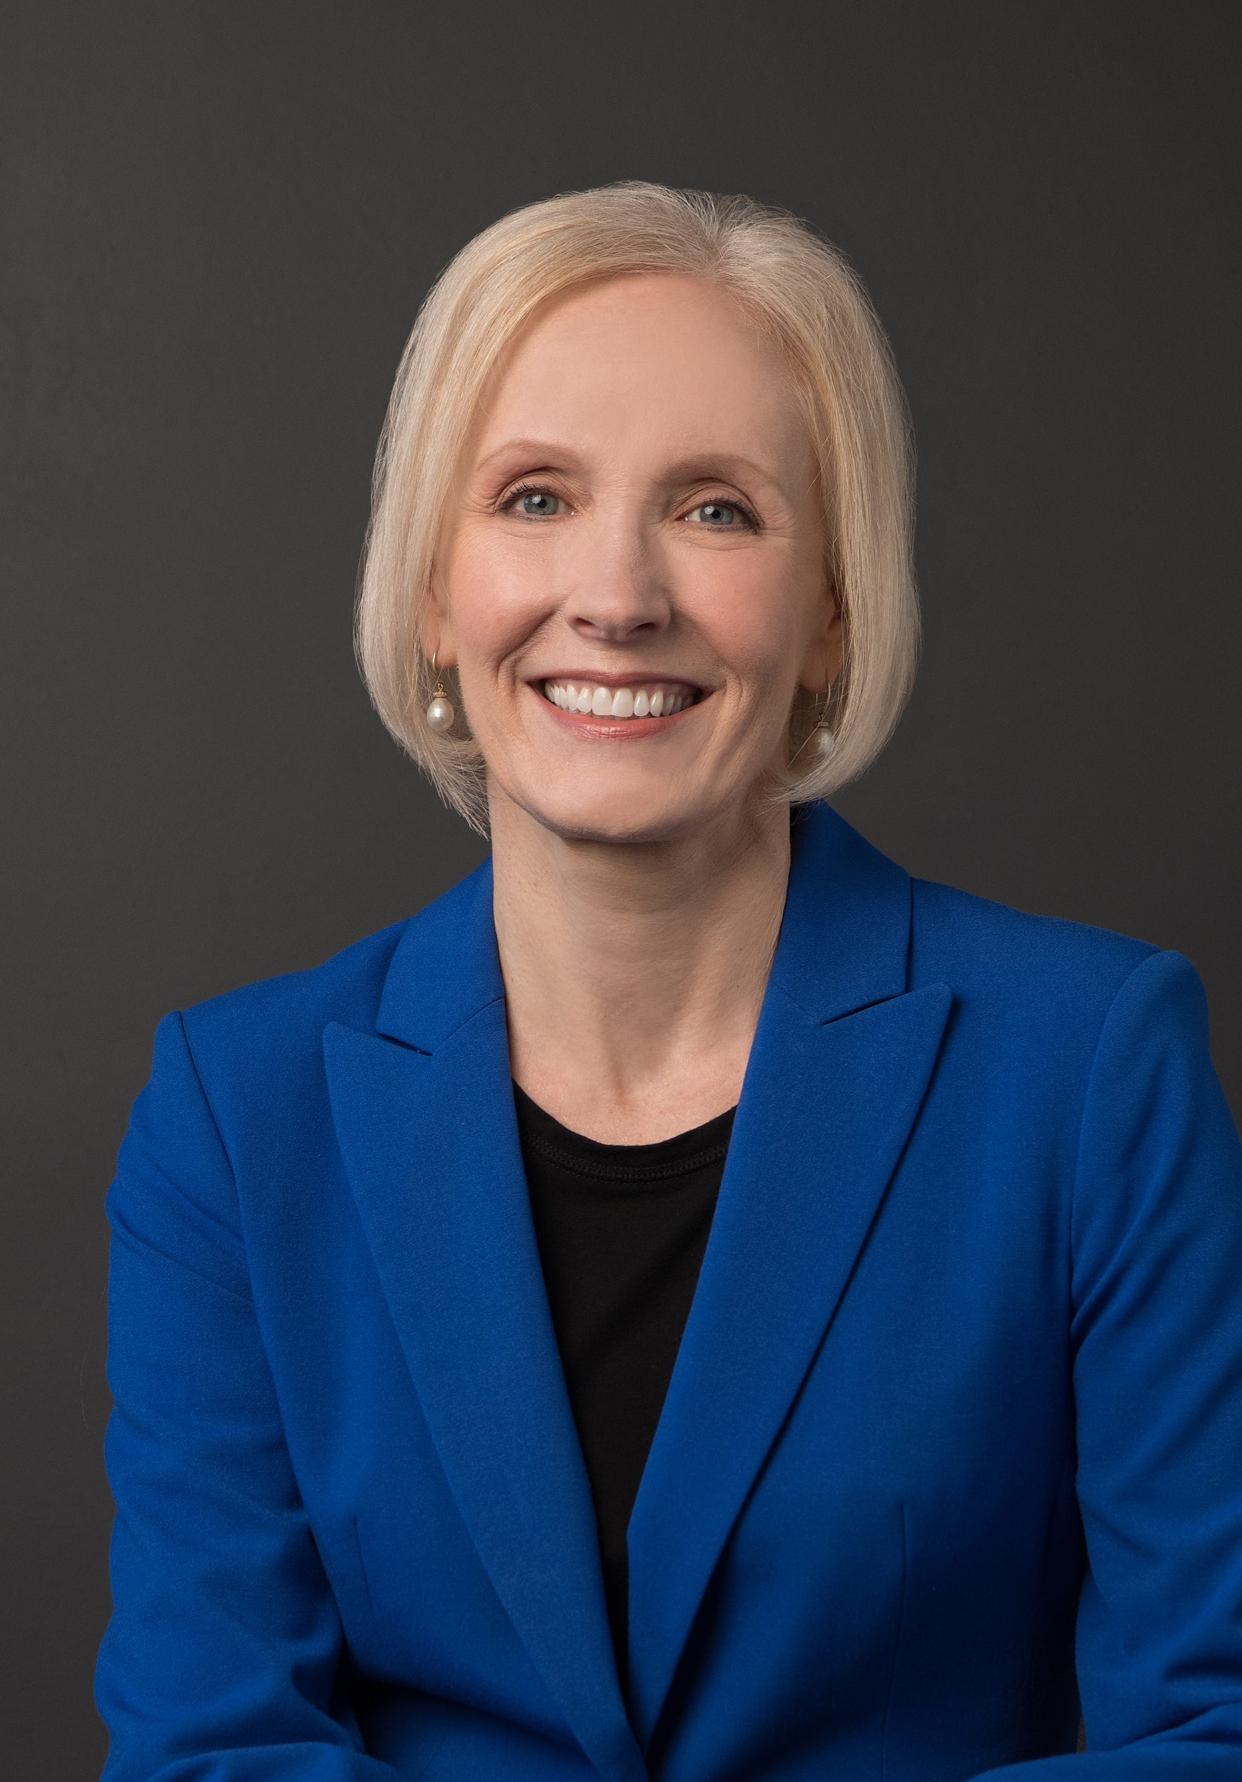 Roxanna Gapstur Ph.D., R.N., WellSpan Health president and chief executive officer, has been included in the 100 Most Influential People list of 2023 presented by Modern Healthcare, a national industry leader in the healthcare news and information community.